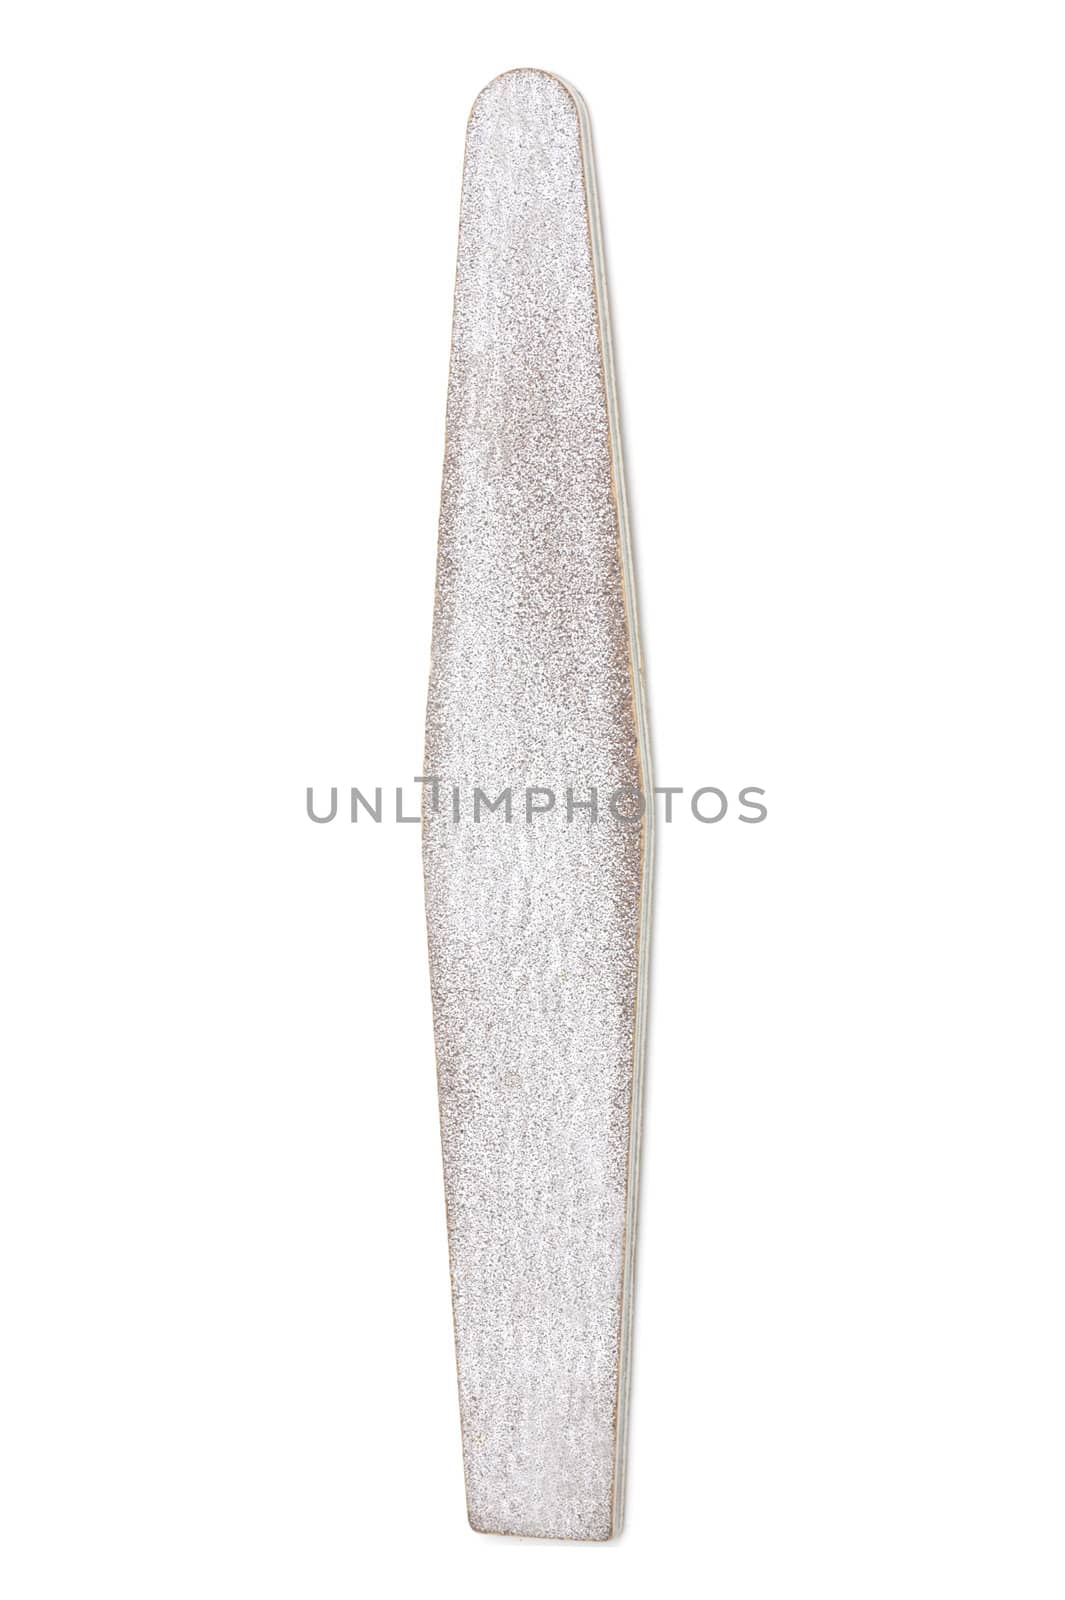  nail file on a white background 